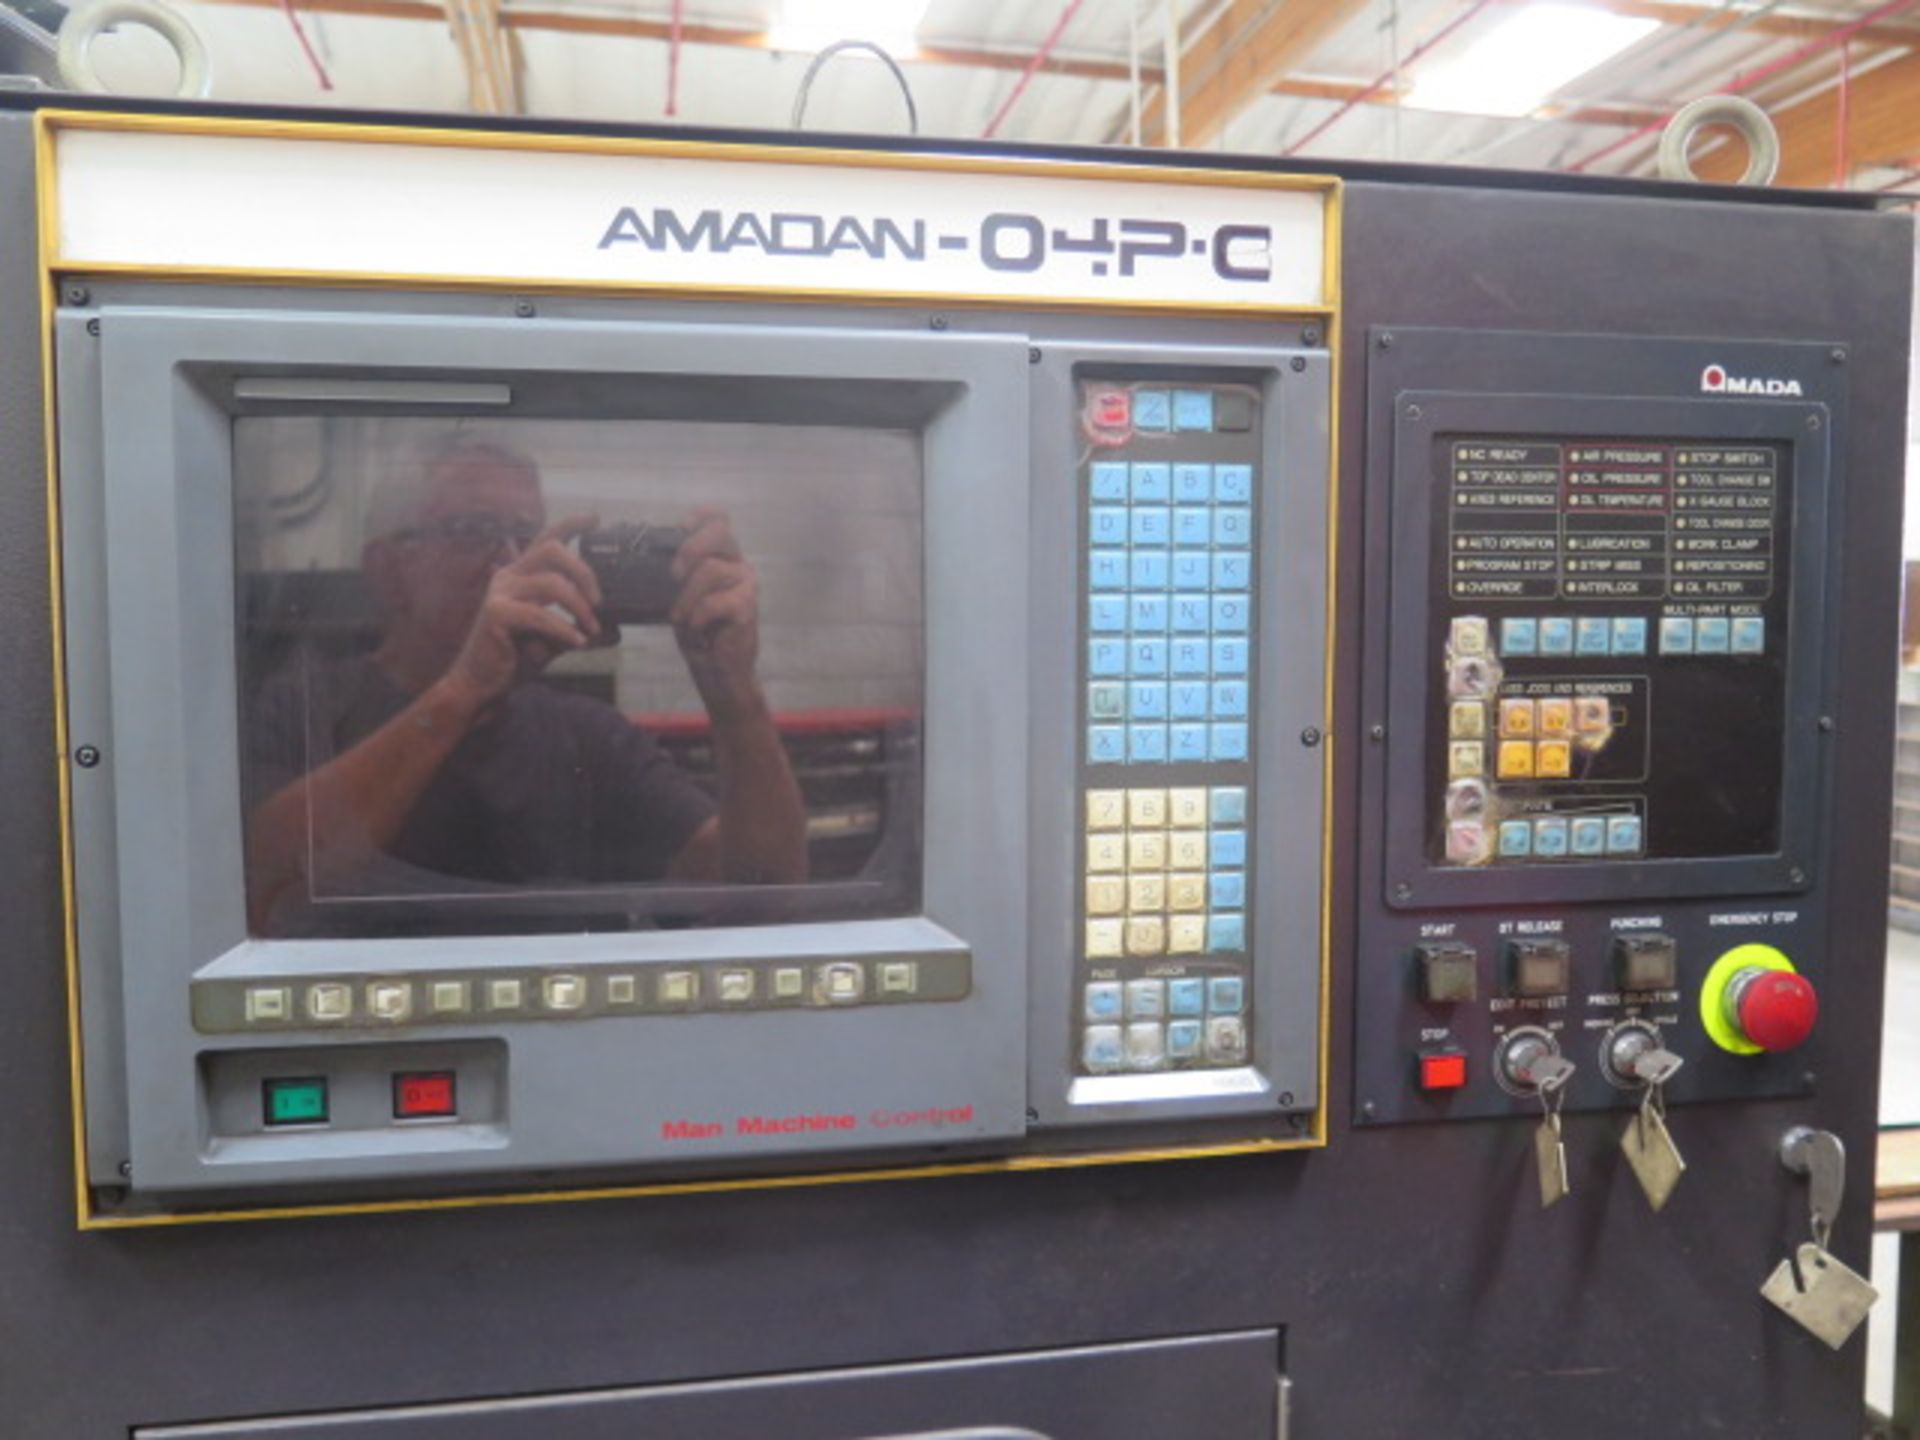 1990 Amada PEGA-345 30-Ton CNC Turret Punch s/n AQ450083 w/ 04P-C Controls, 40-Station, SOLD AS IS - Image 4 of 21